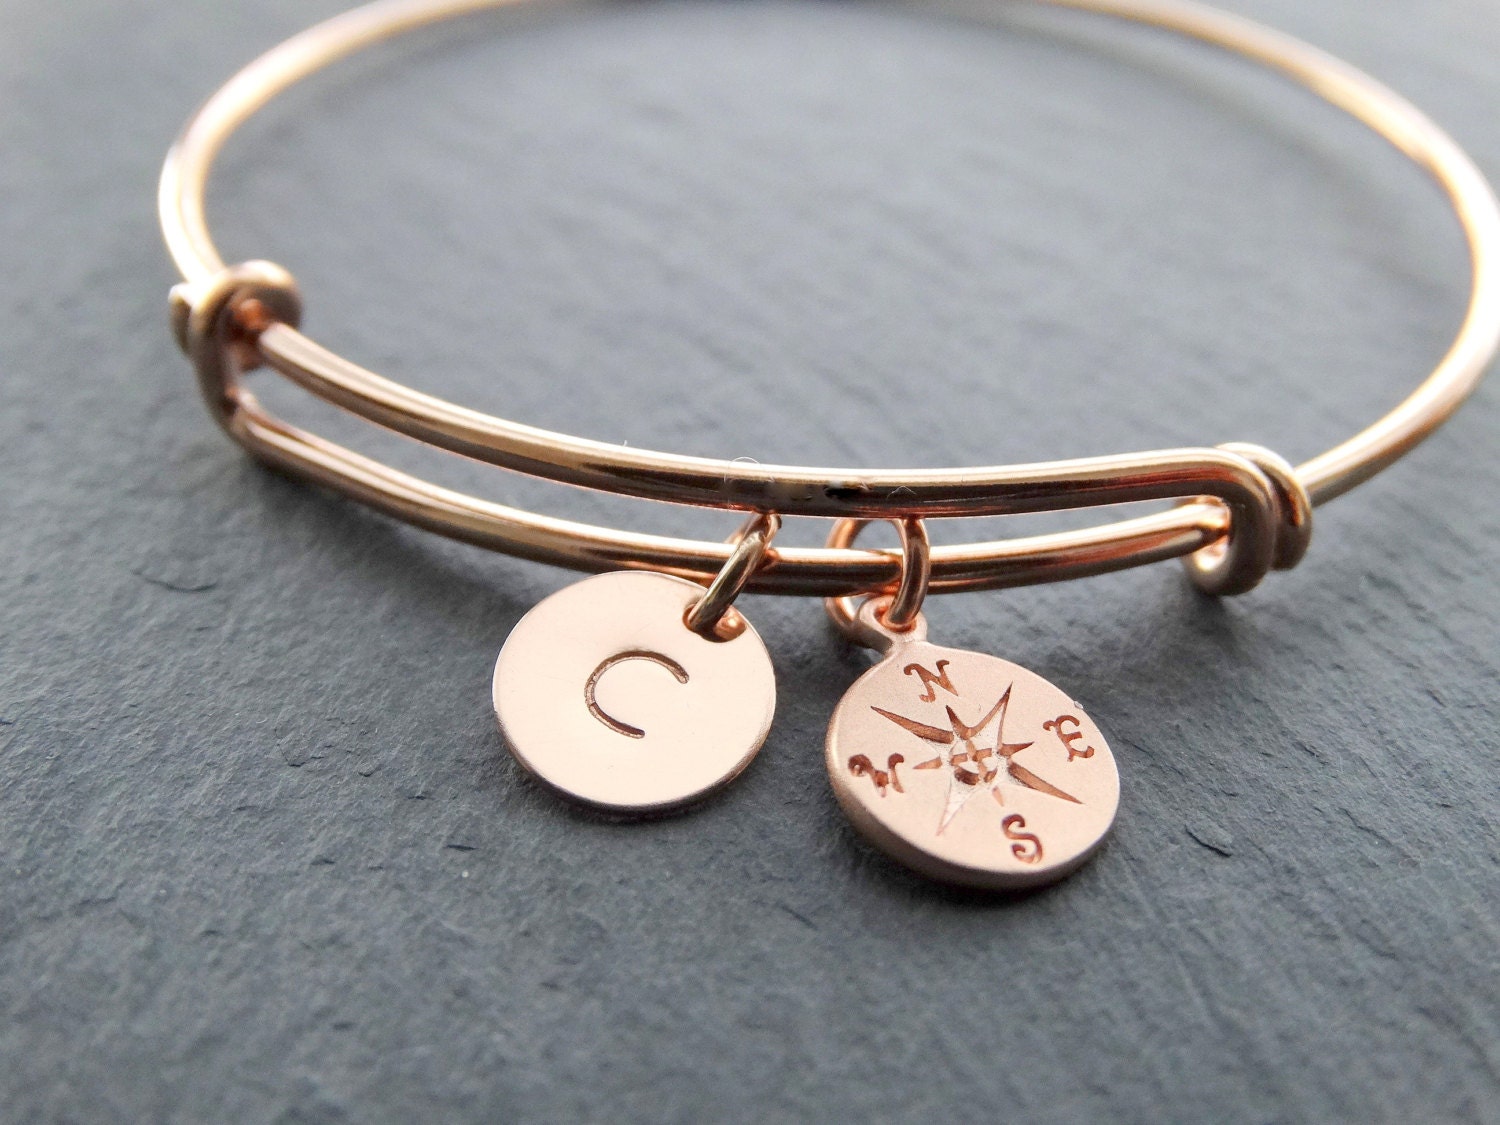 Bangle Bracelet with charms rose gold Compass Bracelet initial